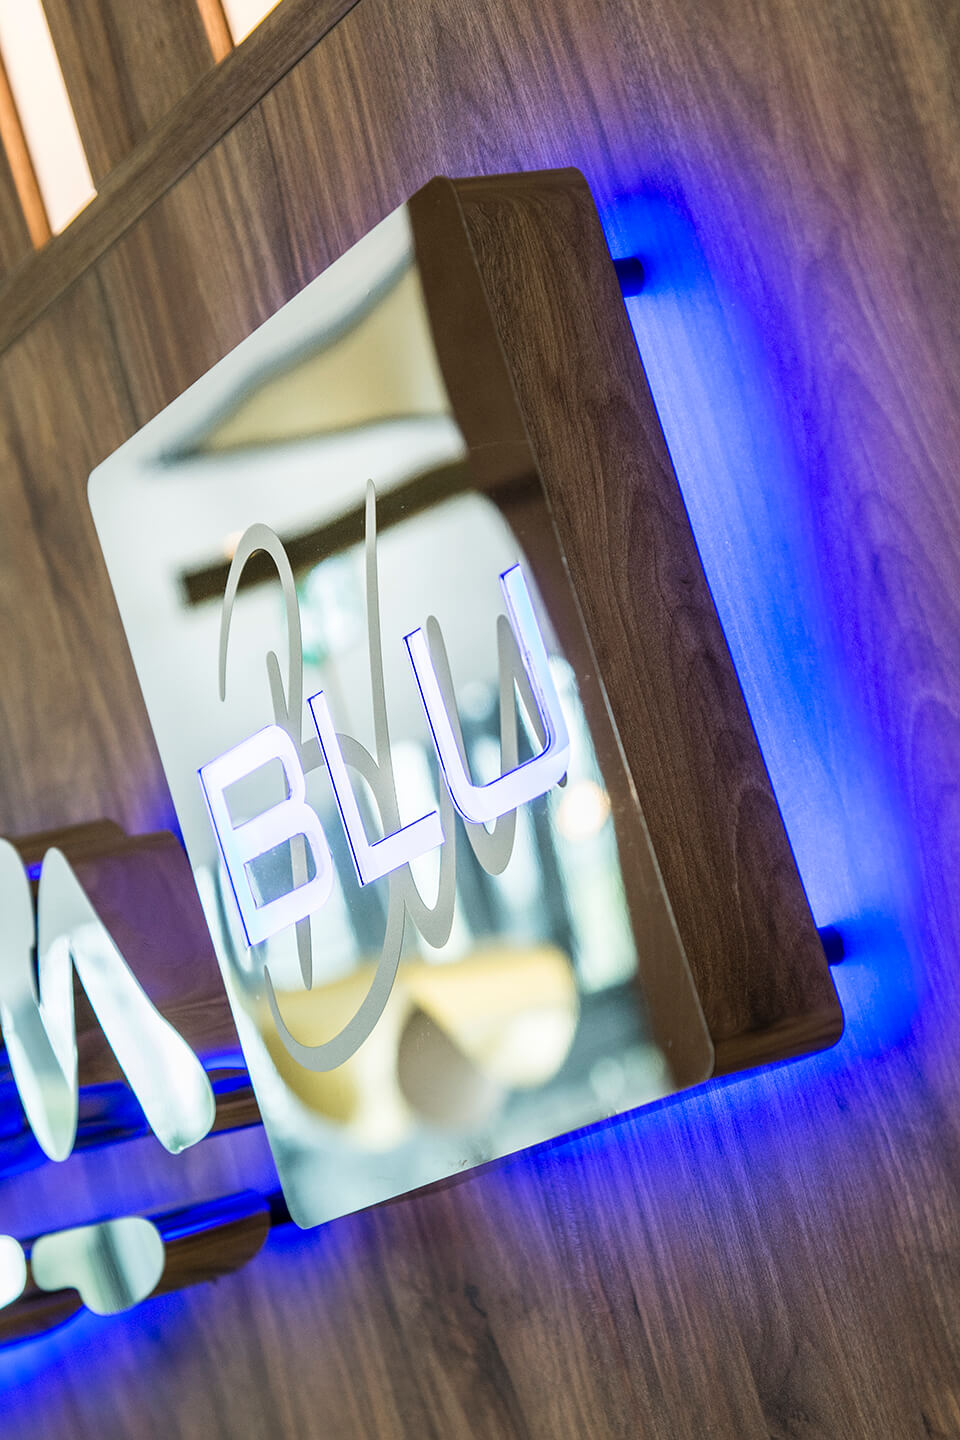 radisson Sopot blu hotel - radisson-blu-letters-in-stainless-steel-literal-lettering-behind-reception-in-hotel-on-a-wooden-wall-literal-lettering-literal-illuminated-from-behind-on-blue-sopot-logo-firm-literal-lettering-exclusive-glamour